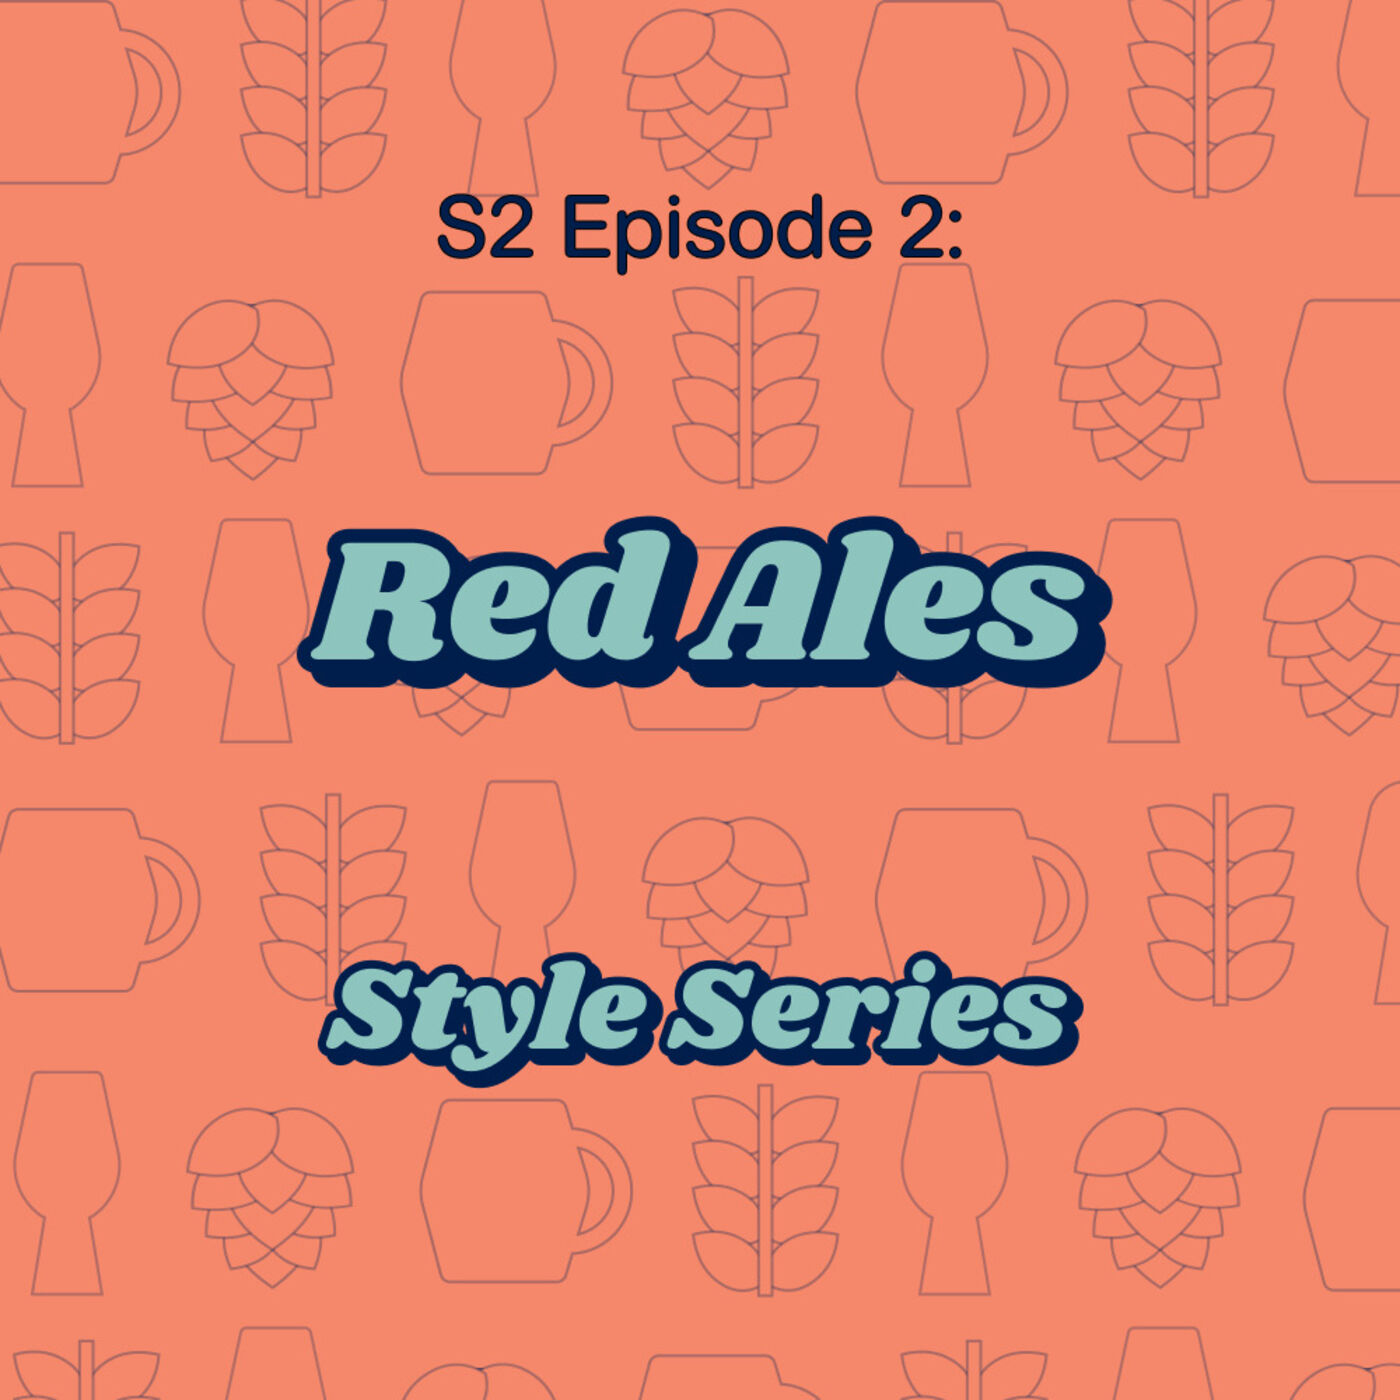 Red Ales